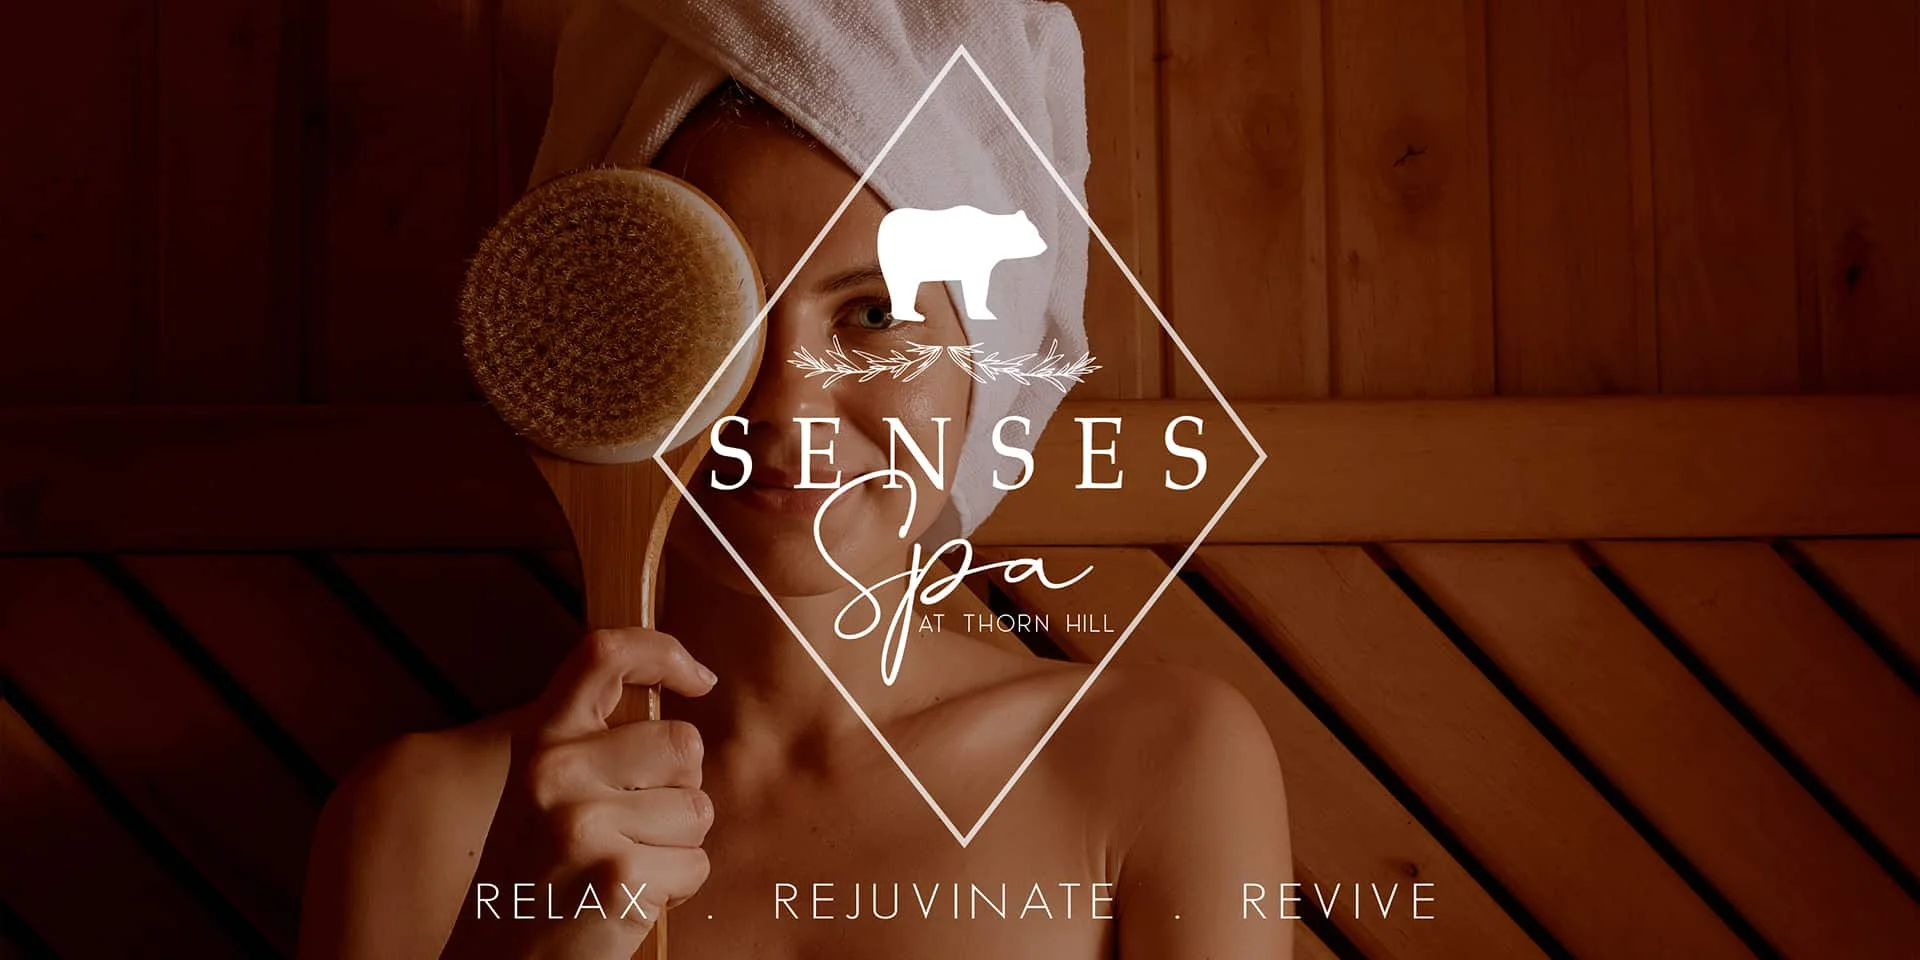 Women in sauna with towel over her hair, Inn at Thorn Hill Senses Spa logo over